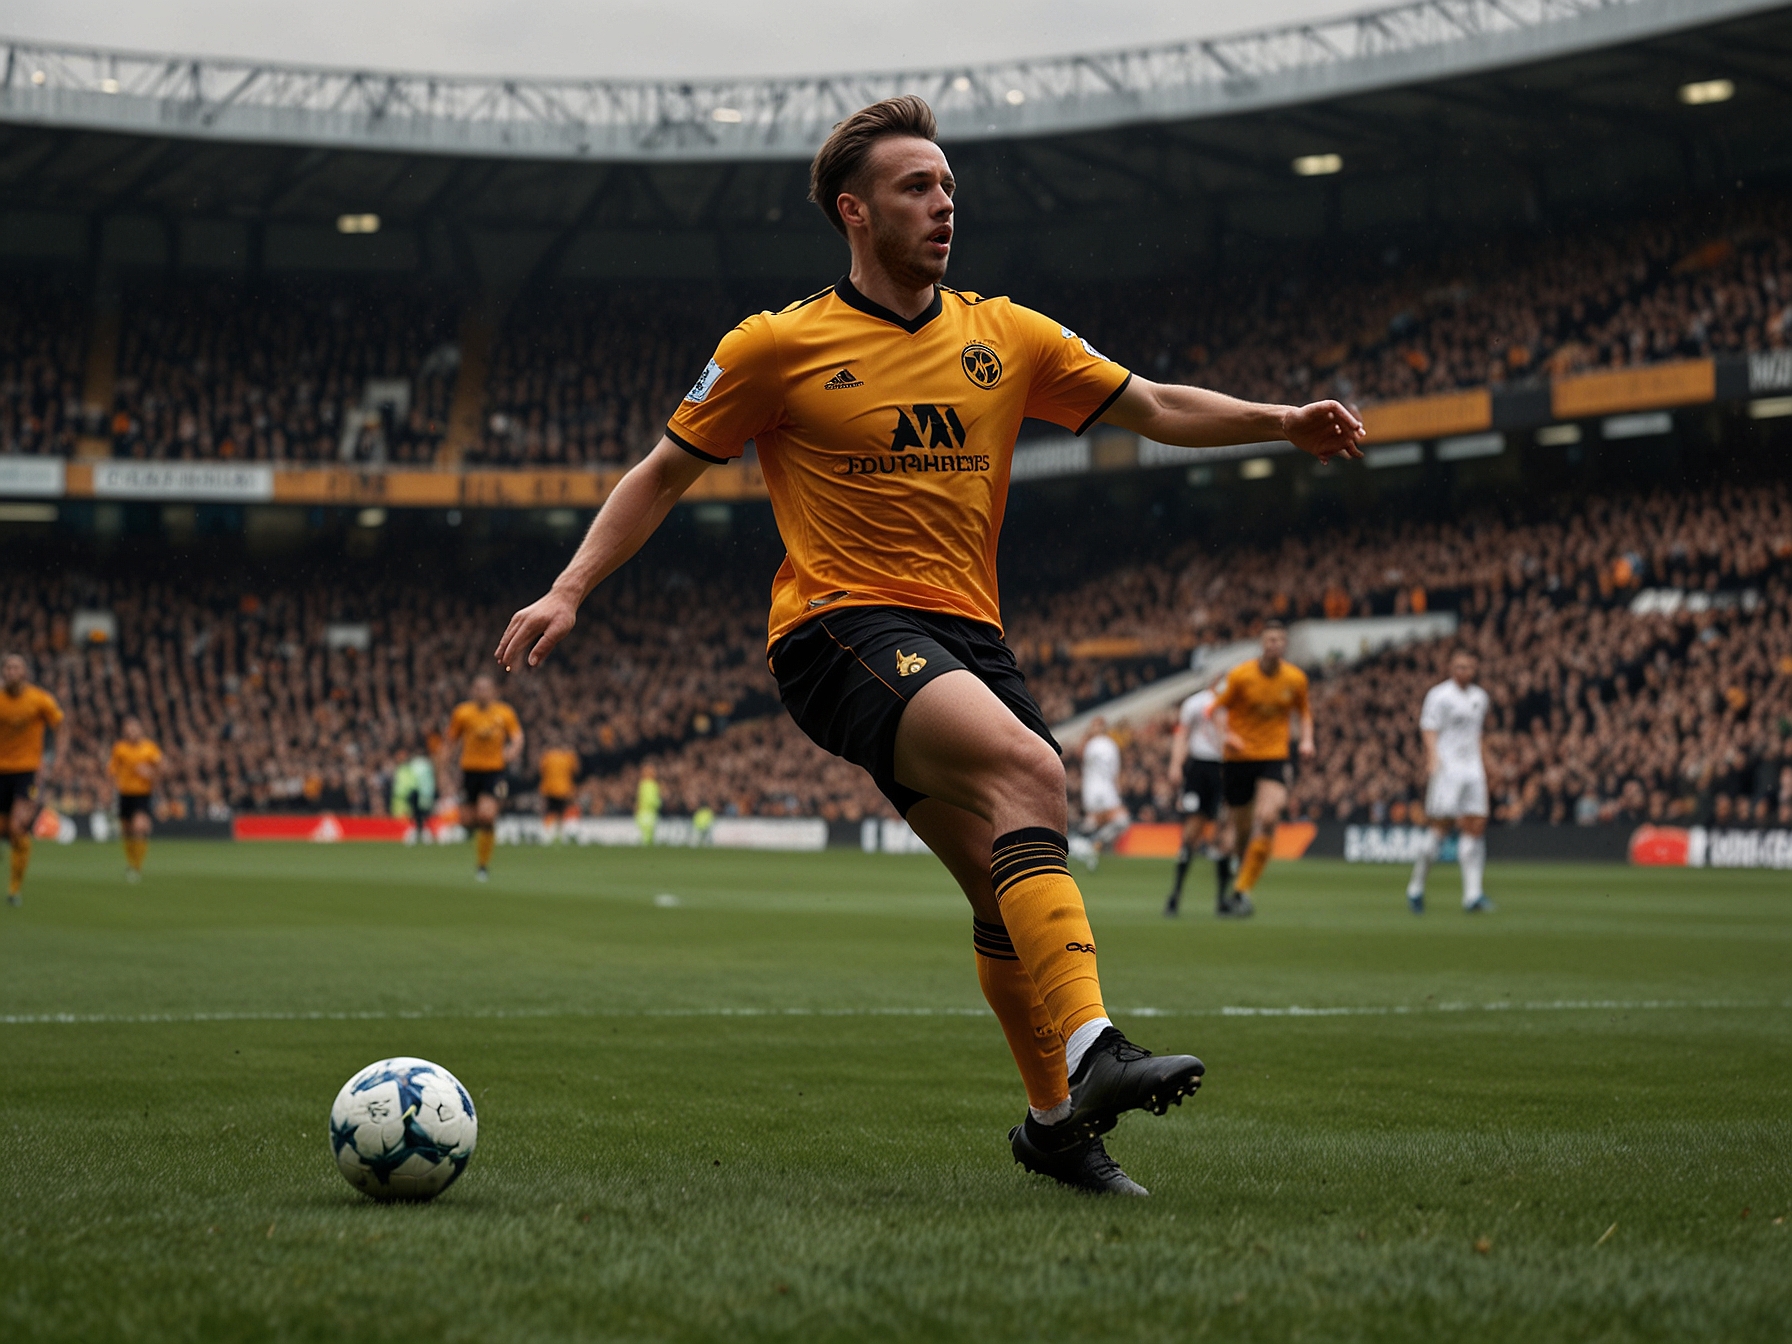 Depiction of Max Kilman in action for Wolverhampton Wanderers, showcasing his strong aerial presence and defensive skills, which have attracted attention from Manchester United.